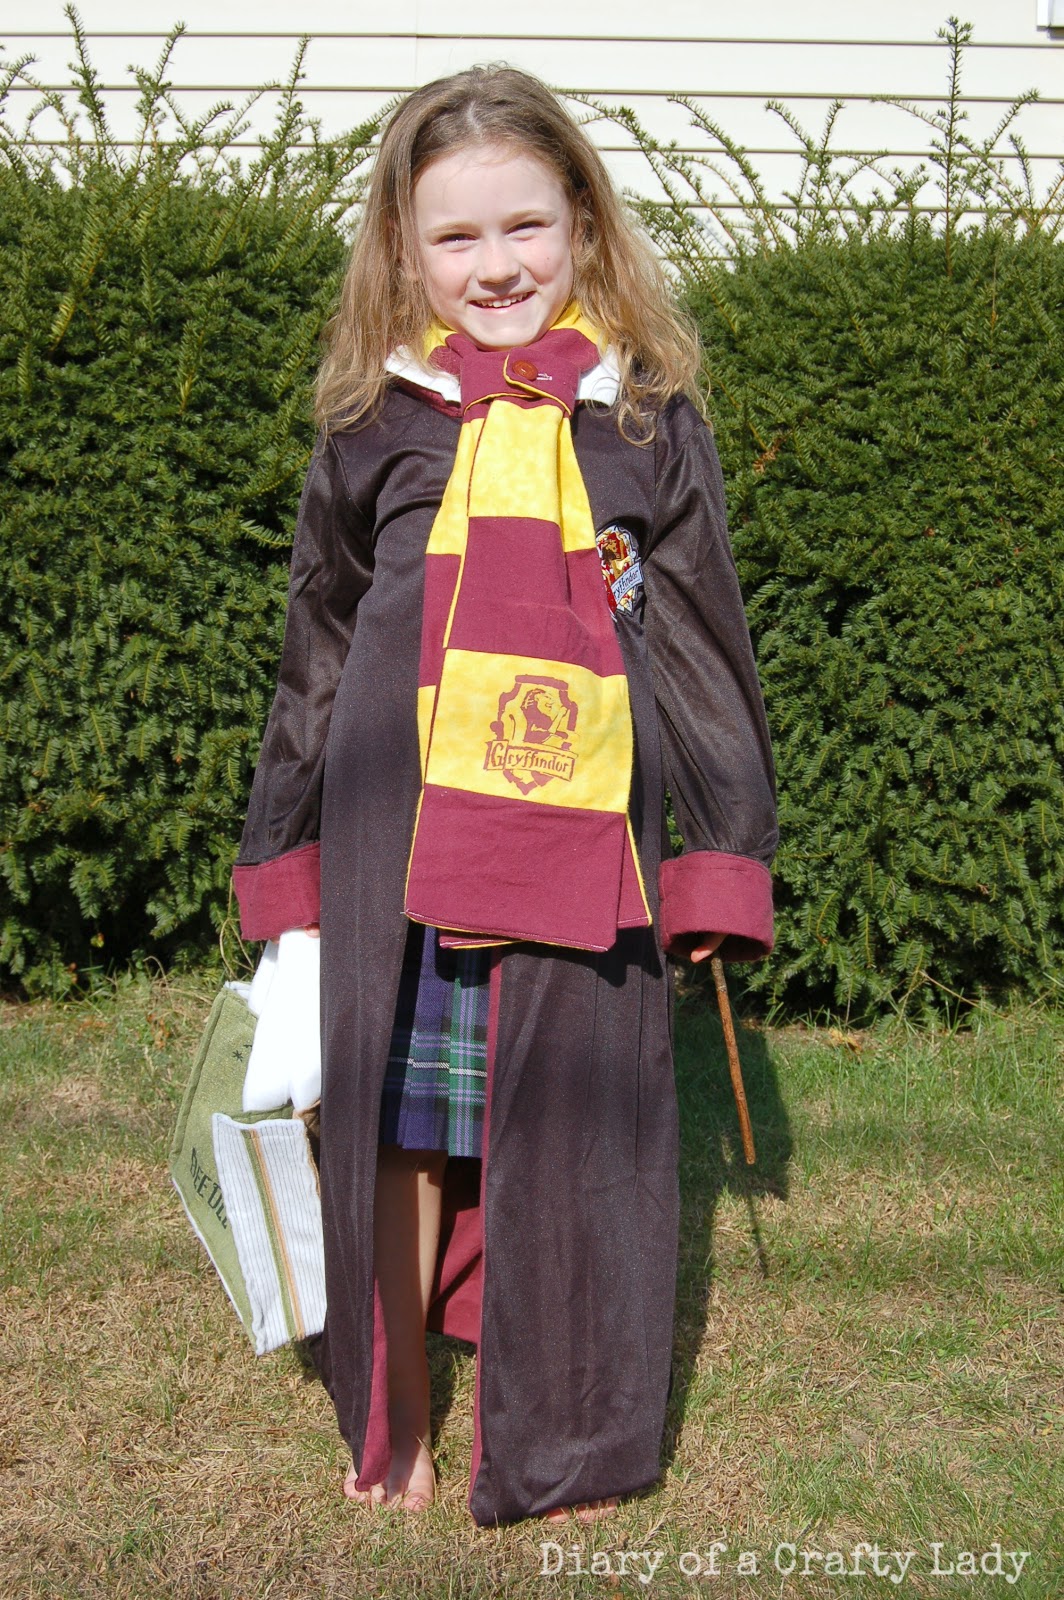 Diary of a Crafty Lady: Harry Potter Halloween Costumes!